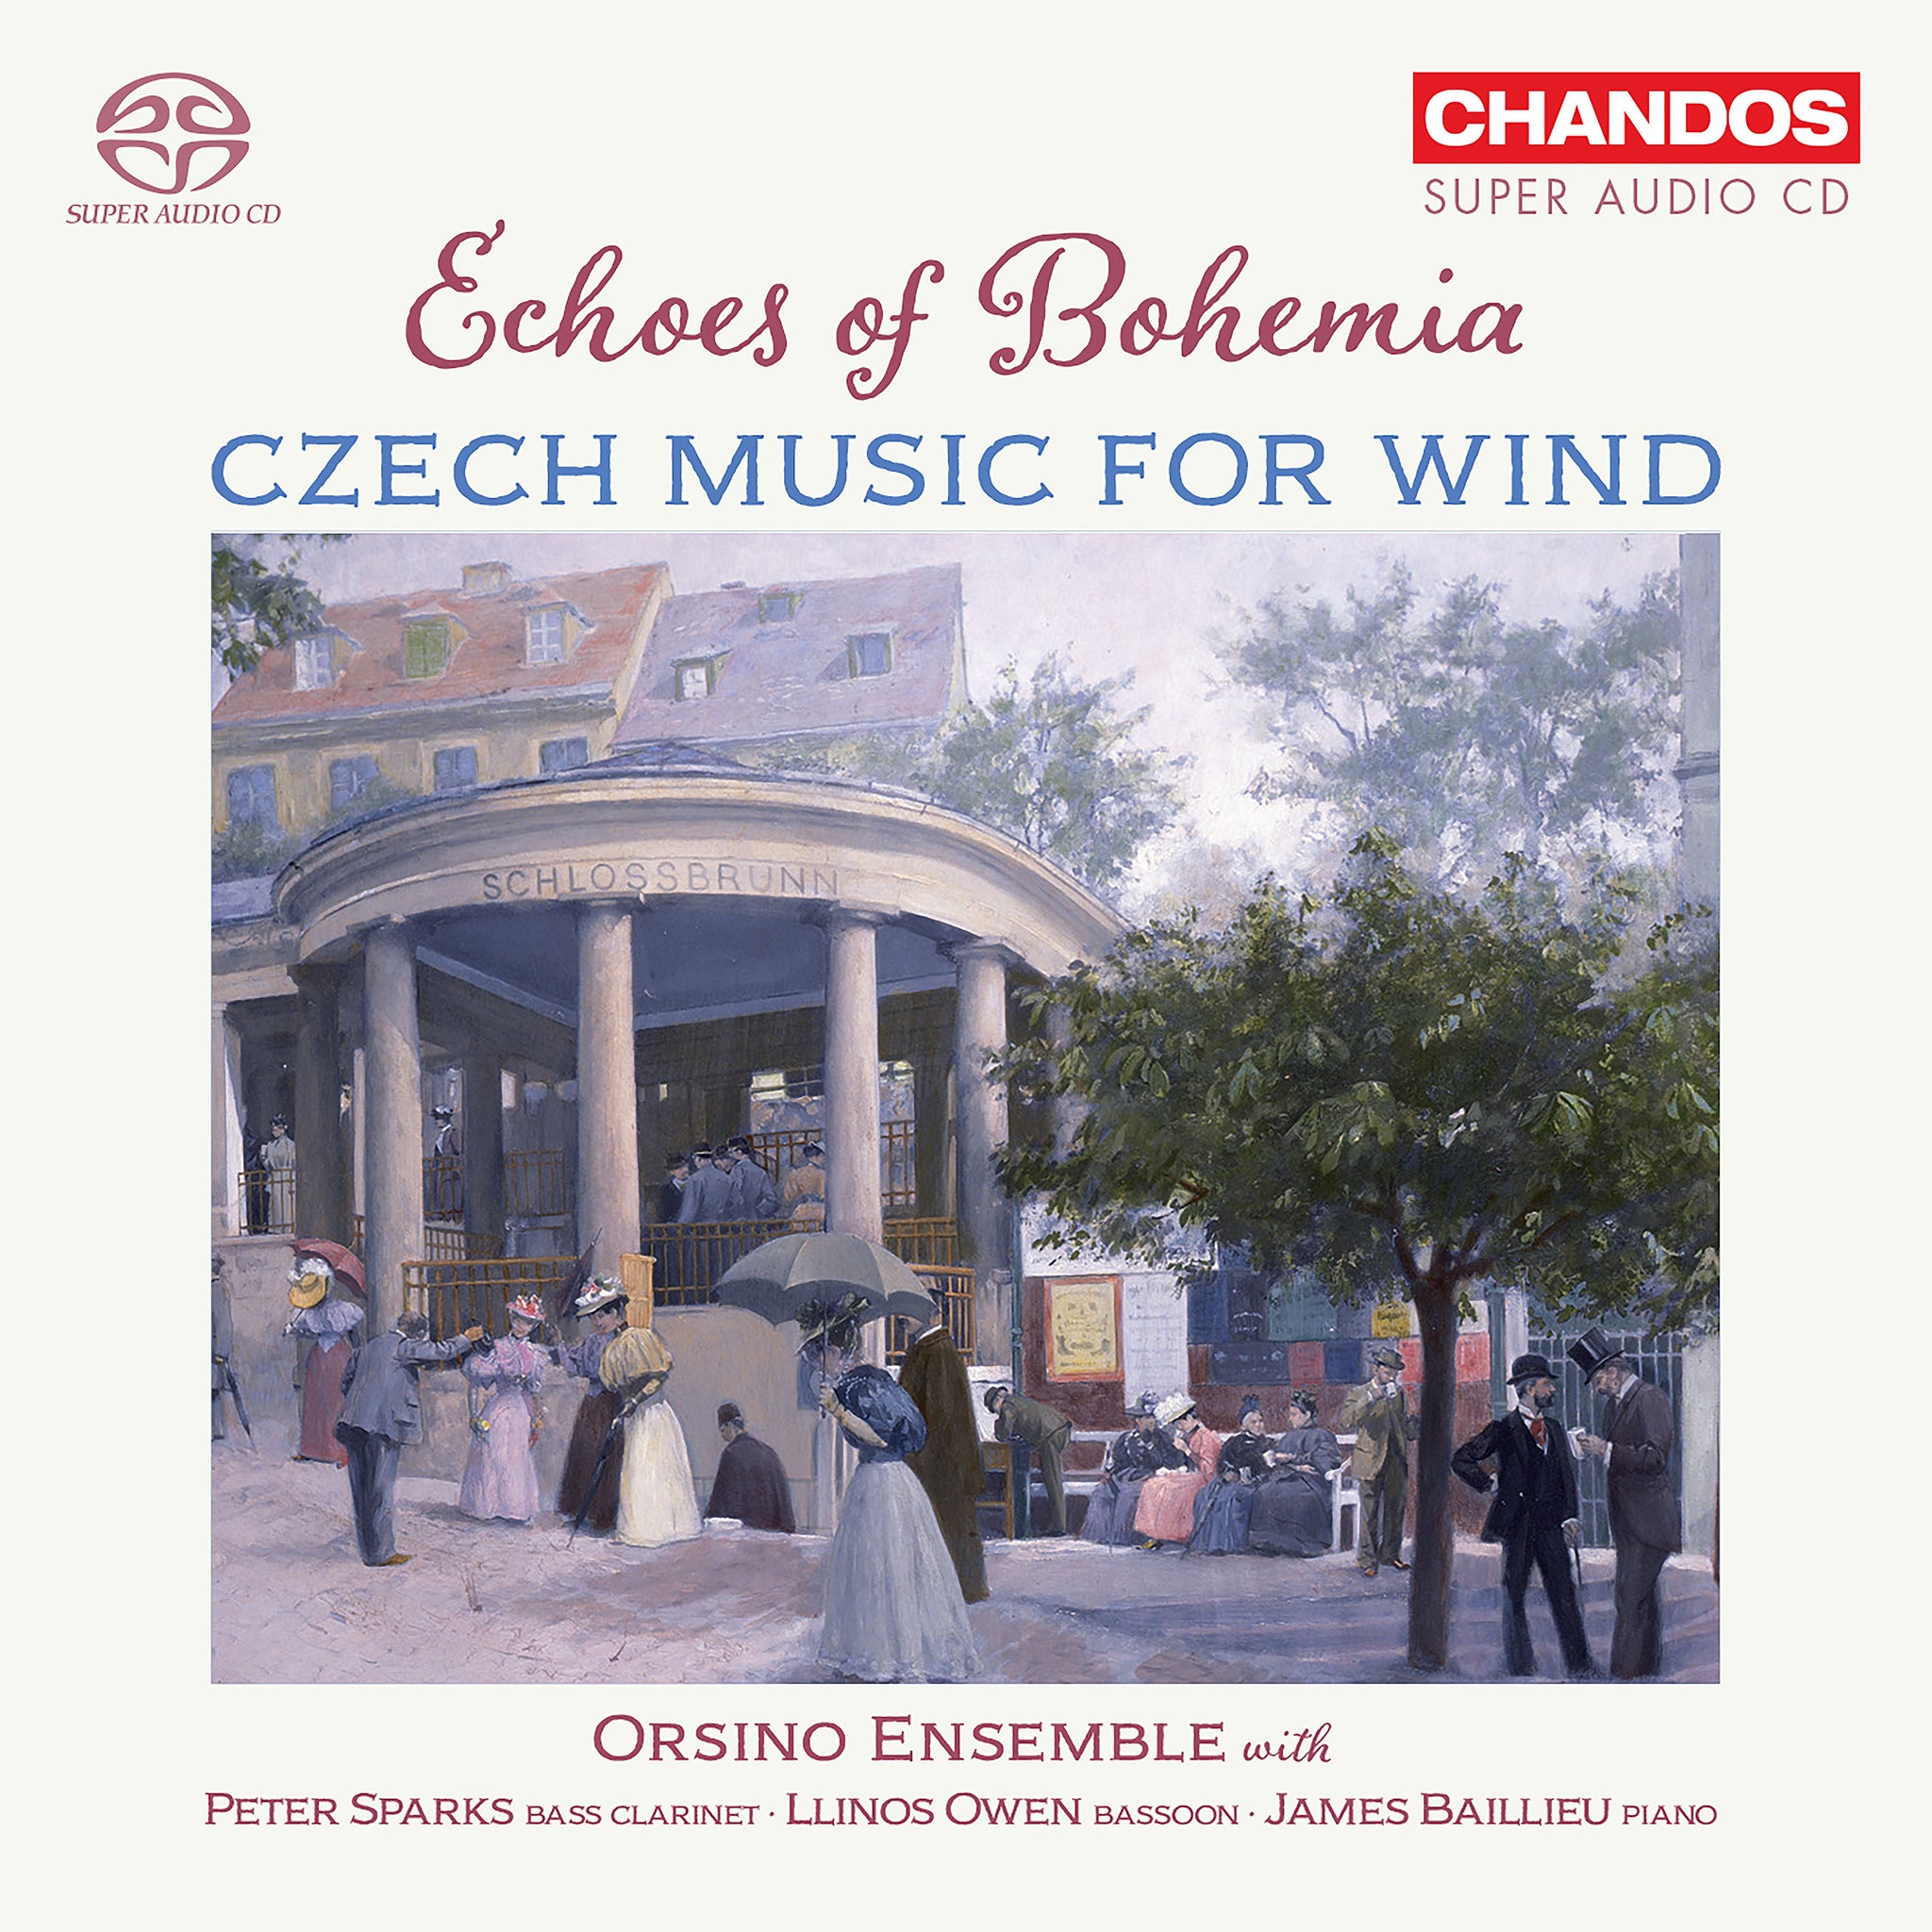 Echoes of Bohemia - 20th-Century Czech Music for Winds / Orsino Ensemble